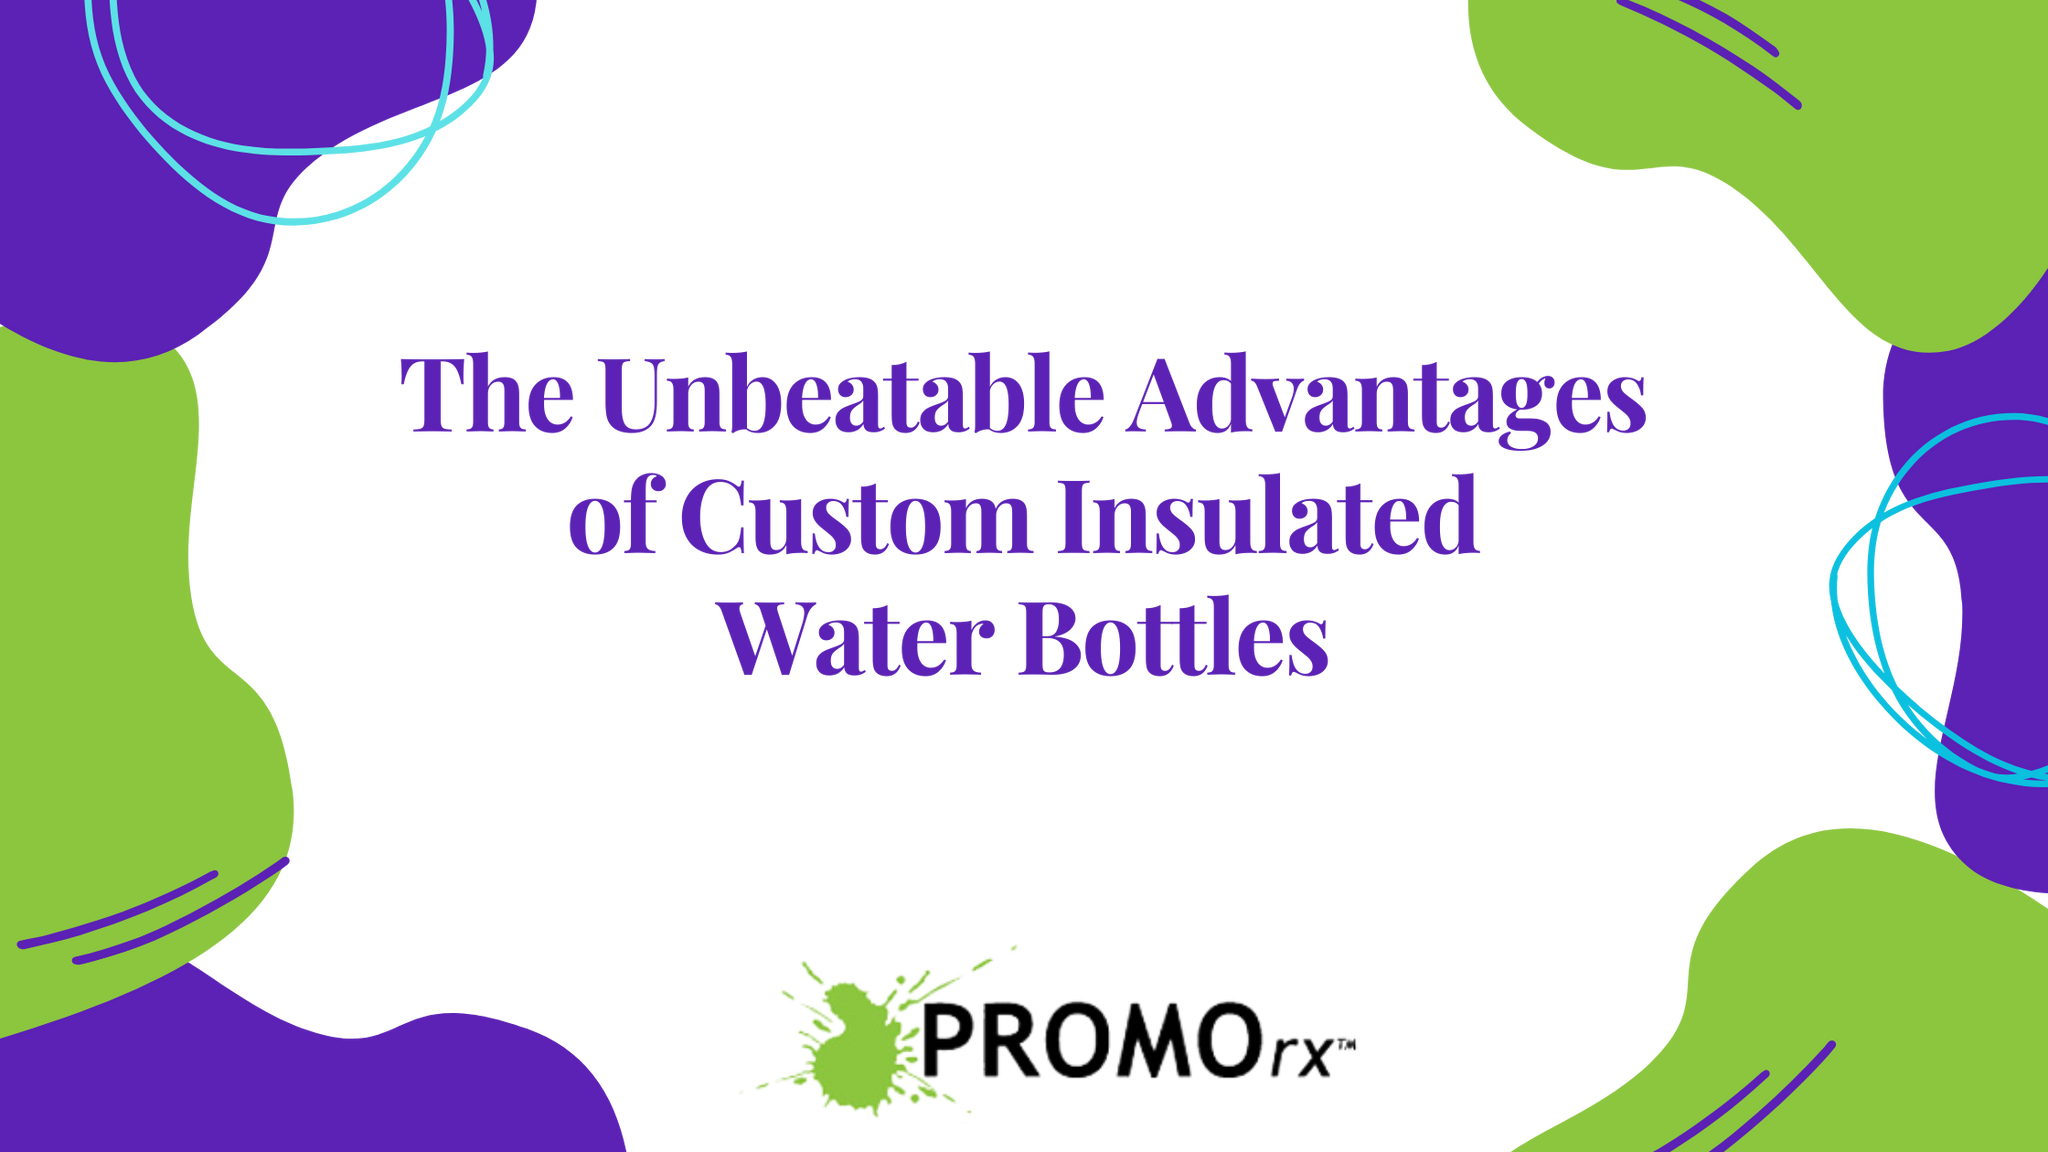 The Unbeatable Advantages of Custom Insulated Water Bottles